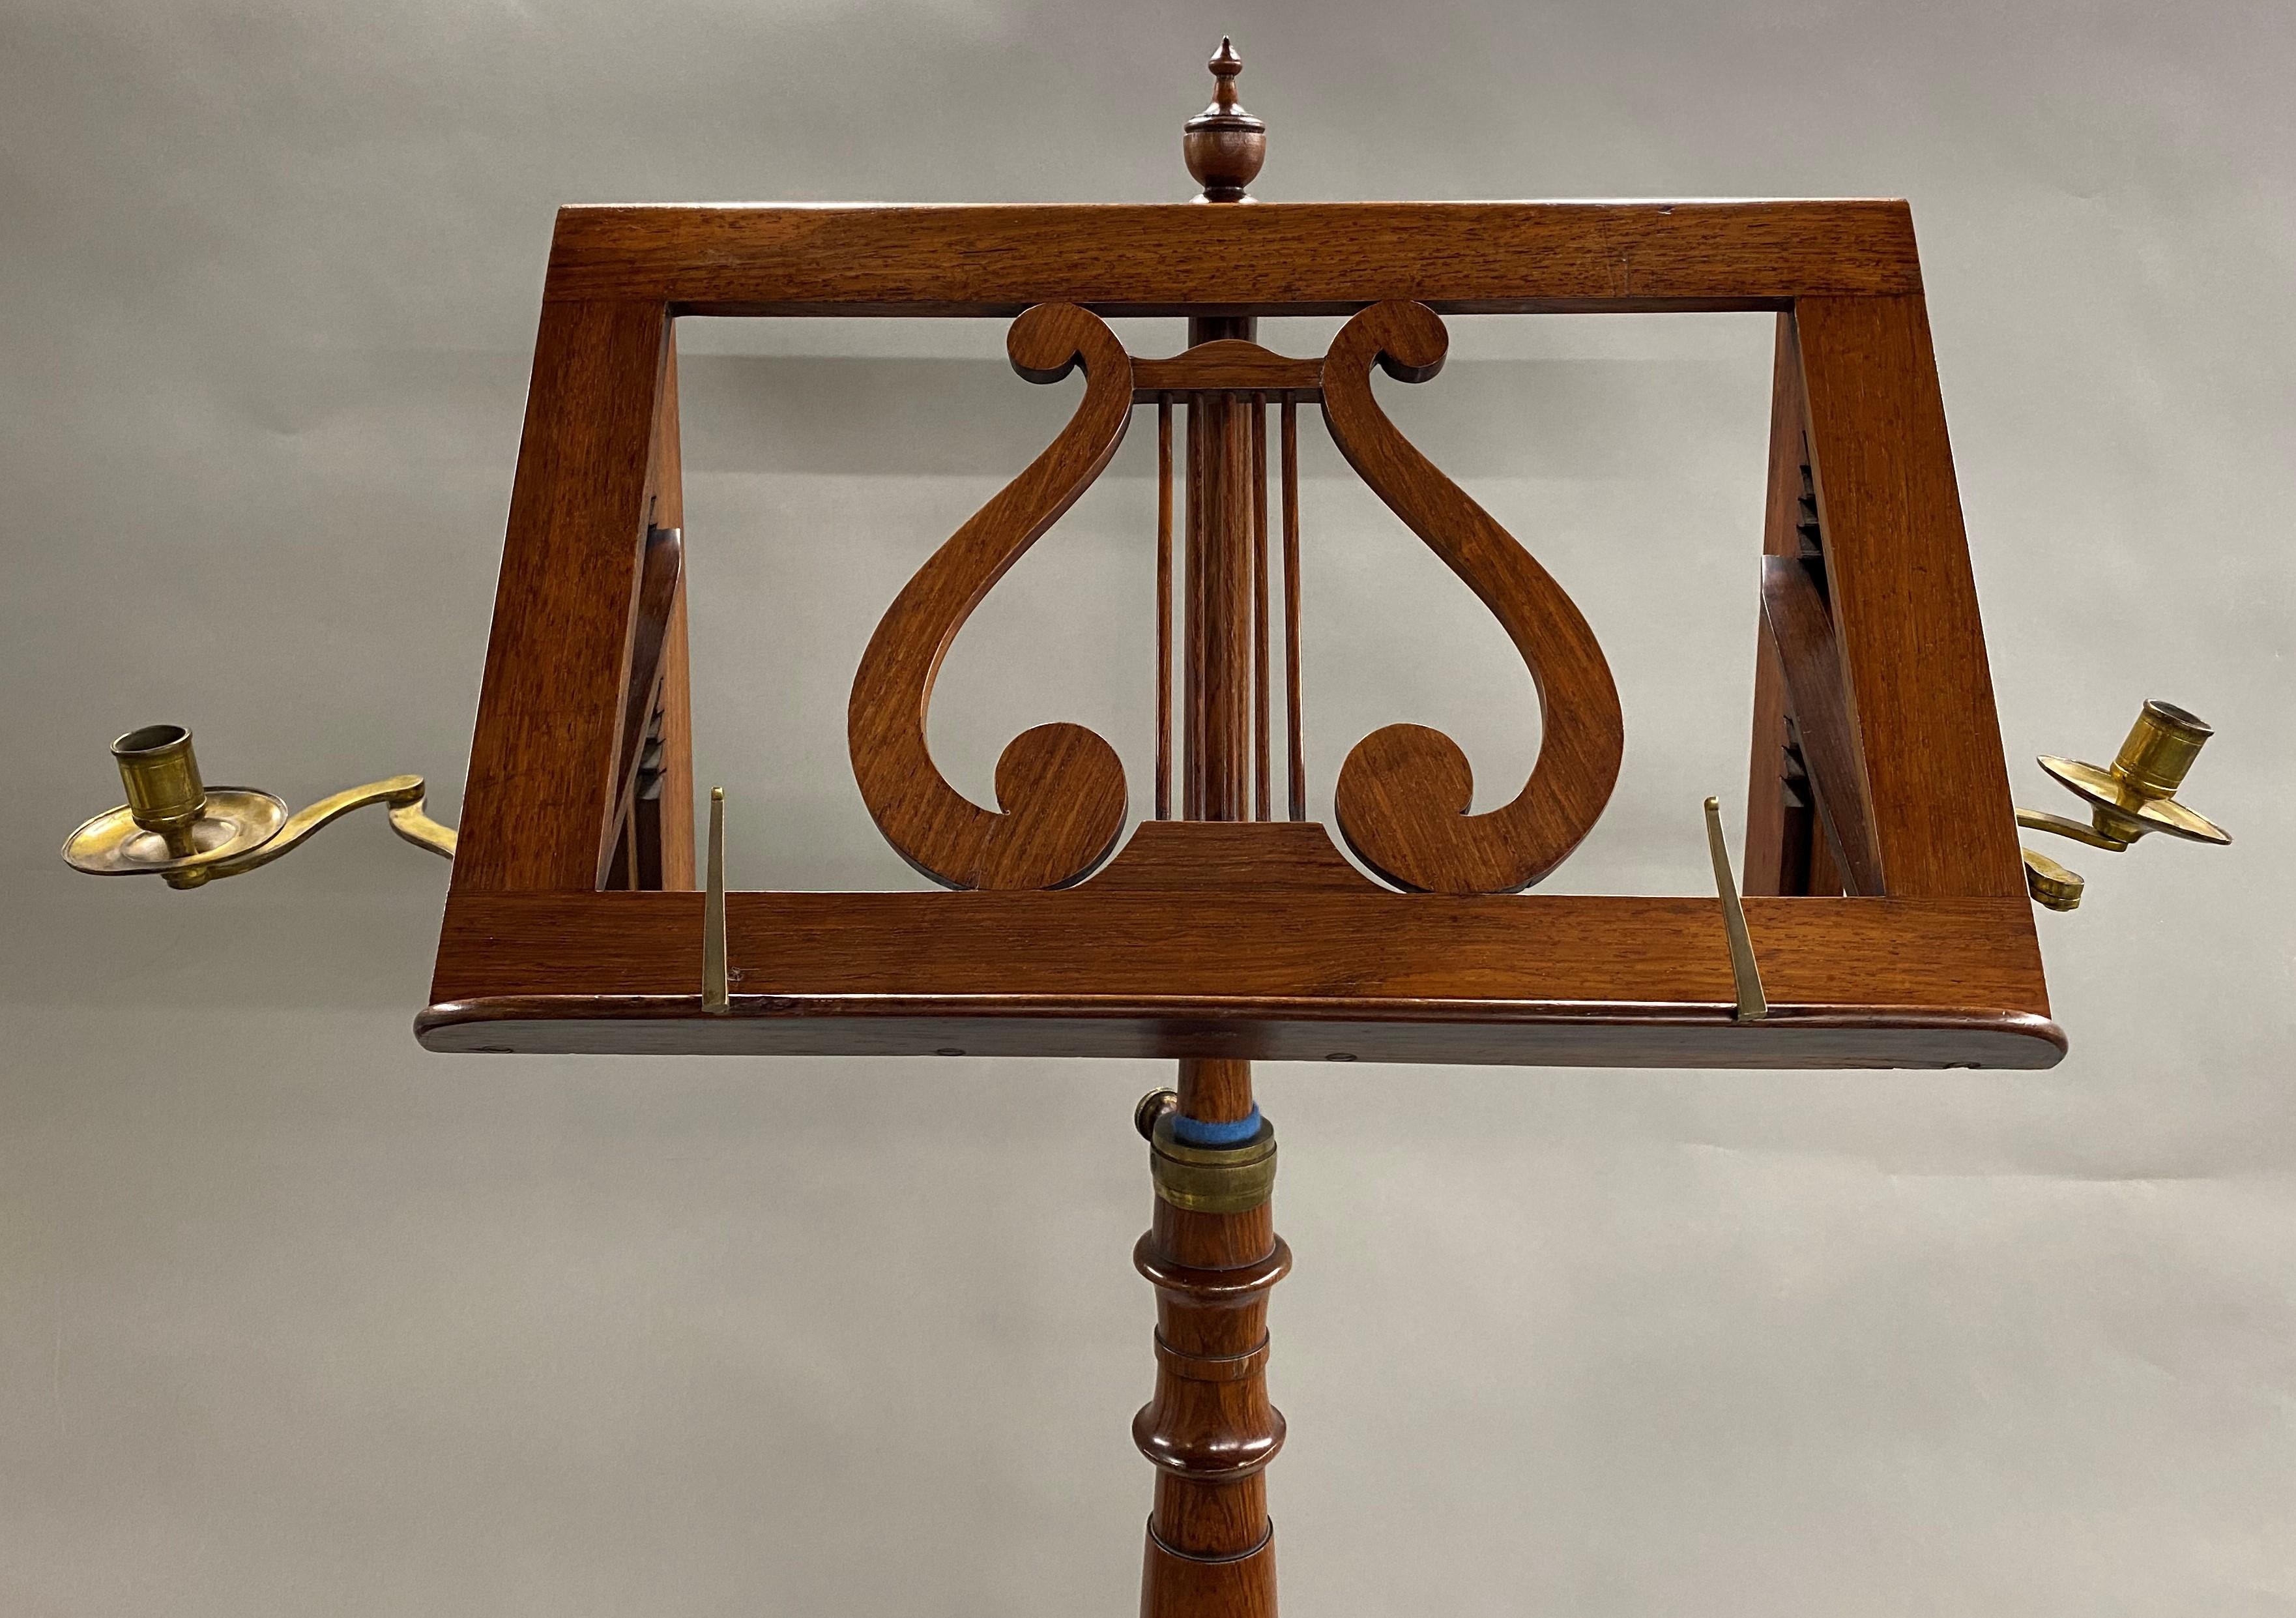 A fine example of an English rosewood music stand with adjustable lyre form tray, with hinged extending brass candle sconces on each side, turned pedestal with adjustable height, on a tripod base with bun feet. Dates to the early 19th century in